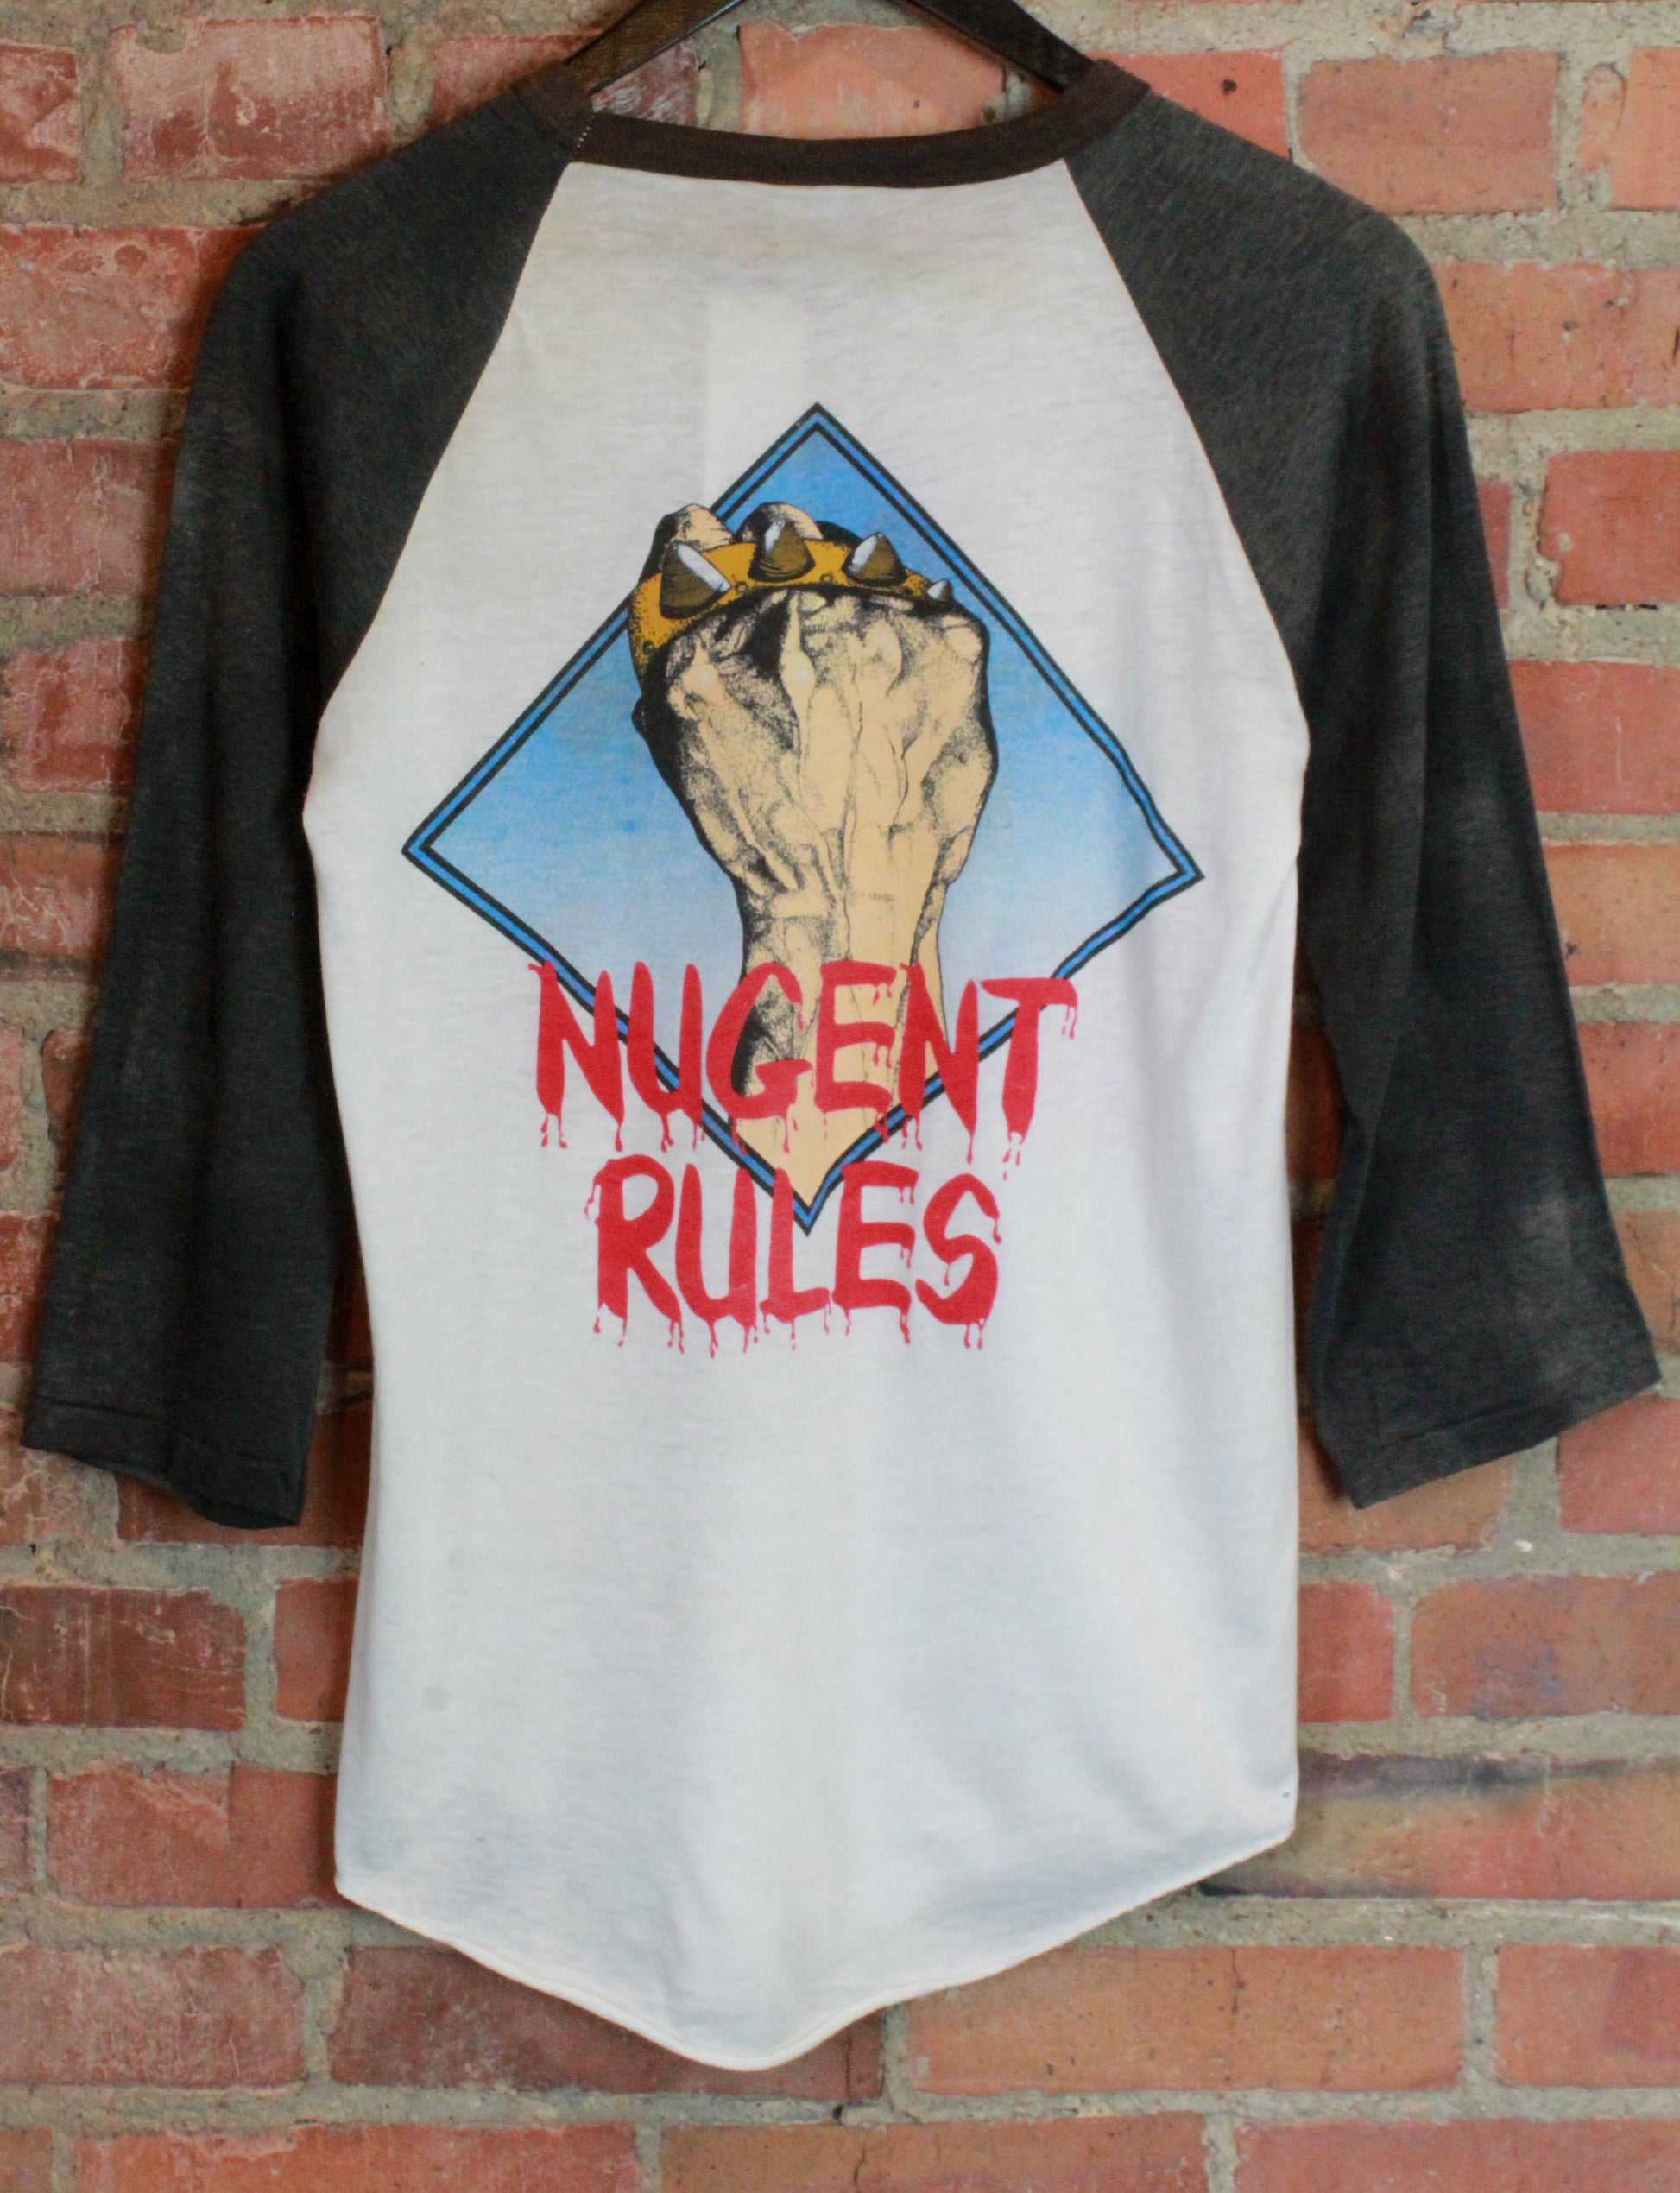 Vintage Ted Nugent Concert T Shirt 1982 Nugent Rules Tour Jersey Unisex Small